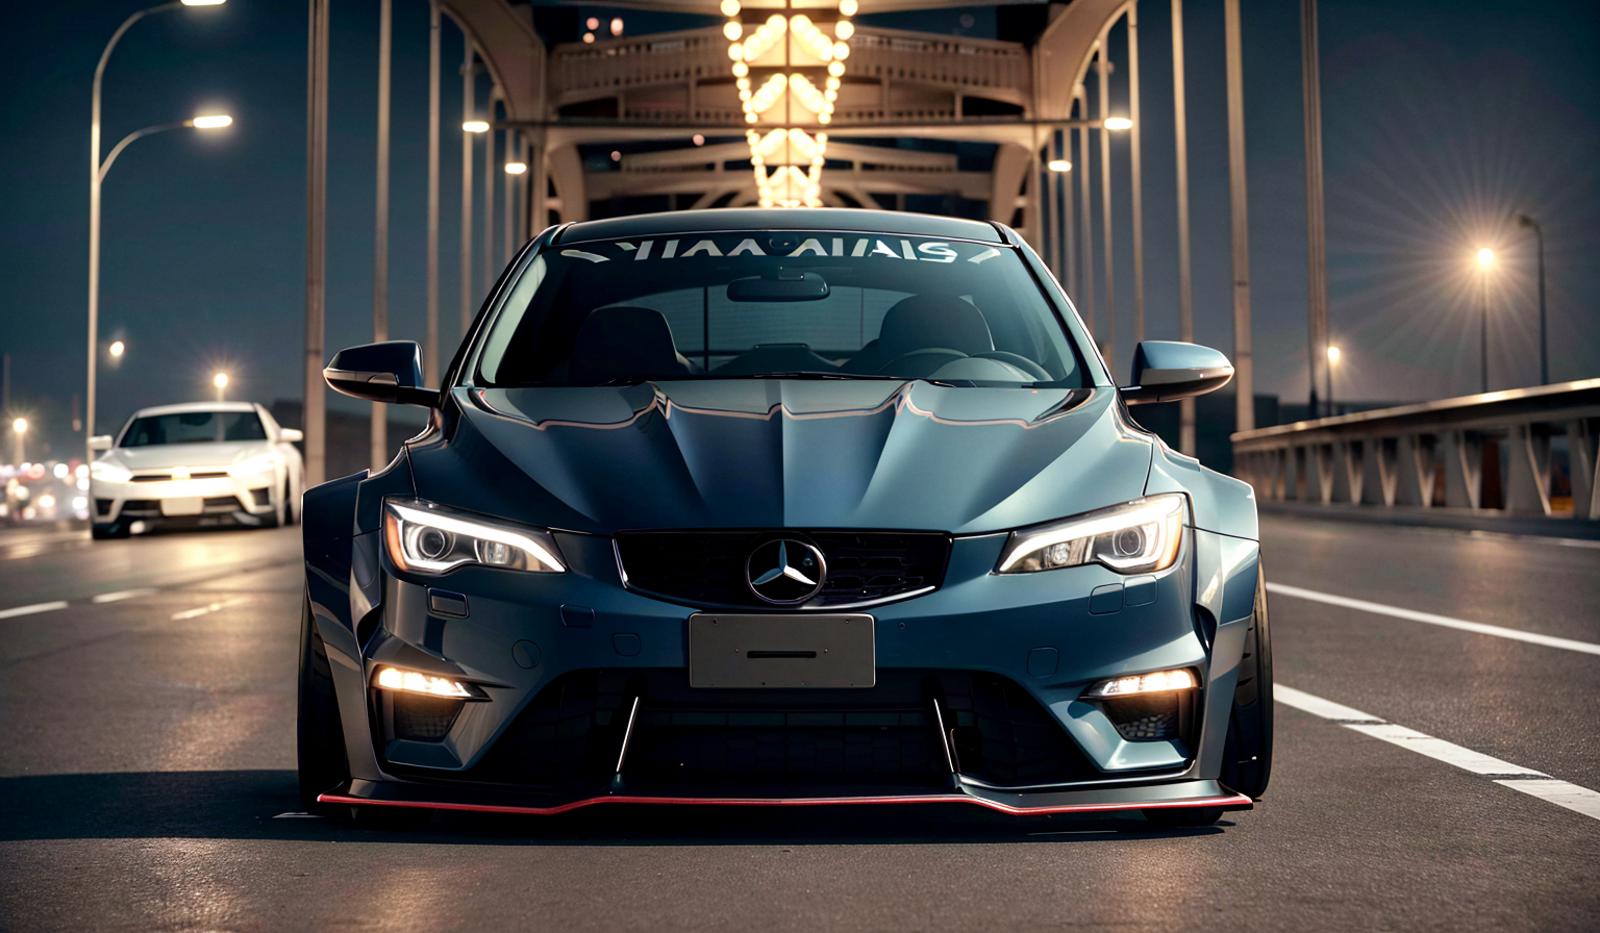 Widebody Cars image by fallenL